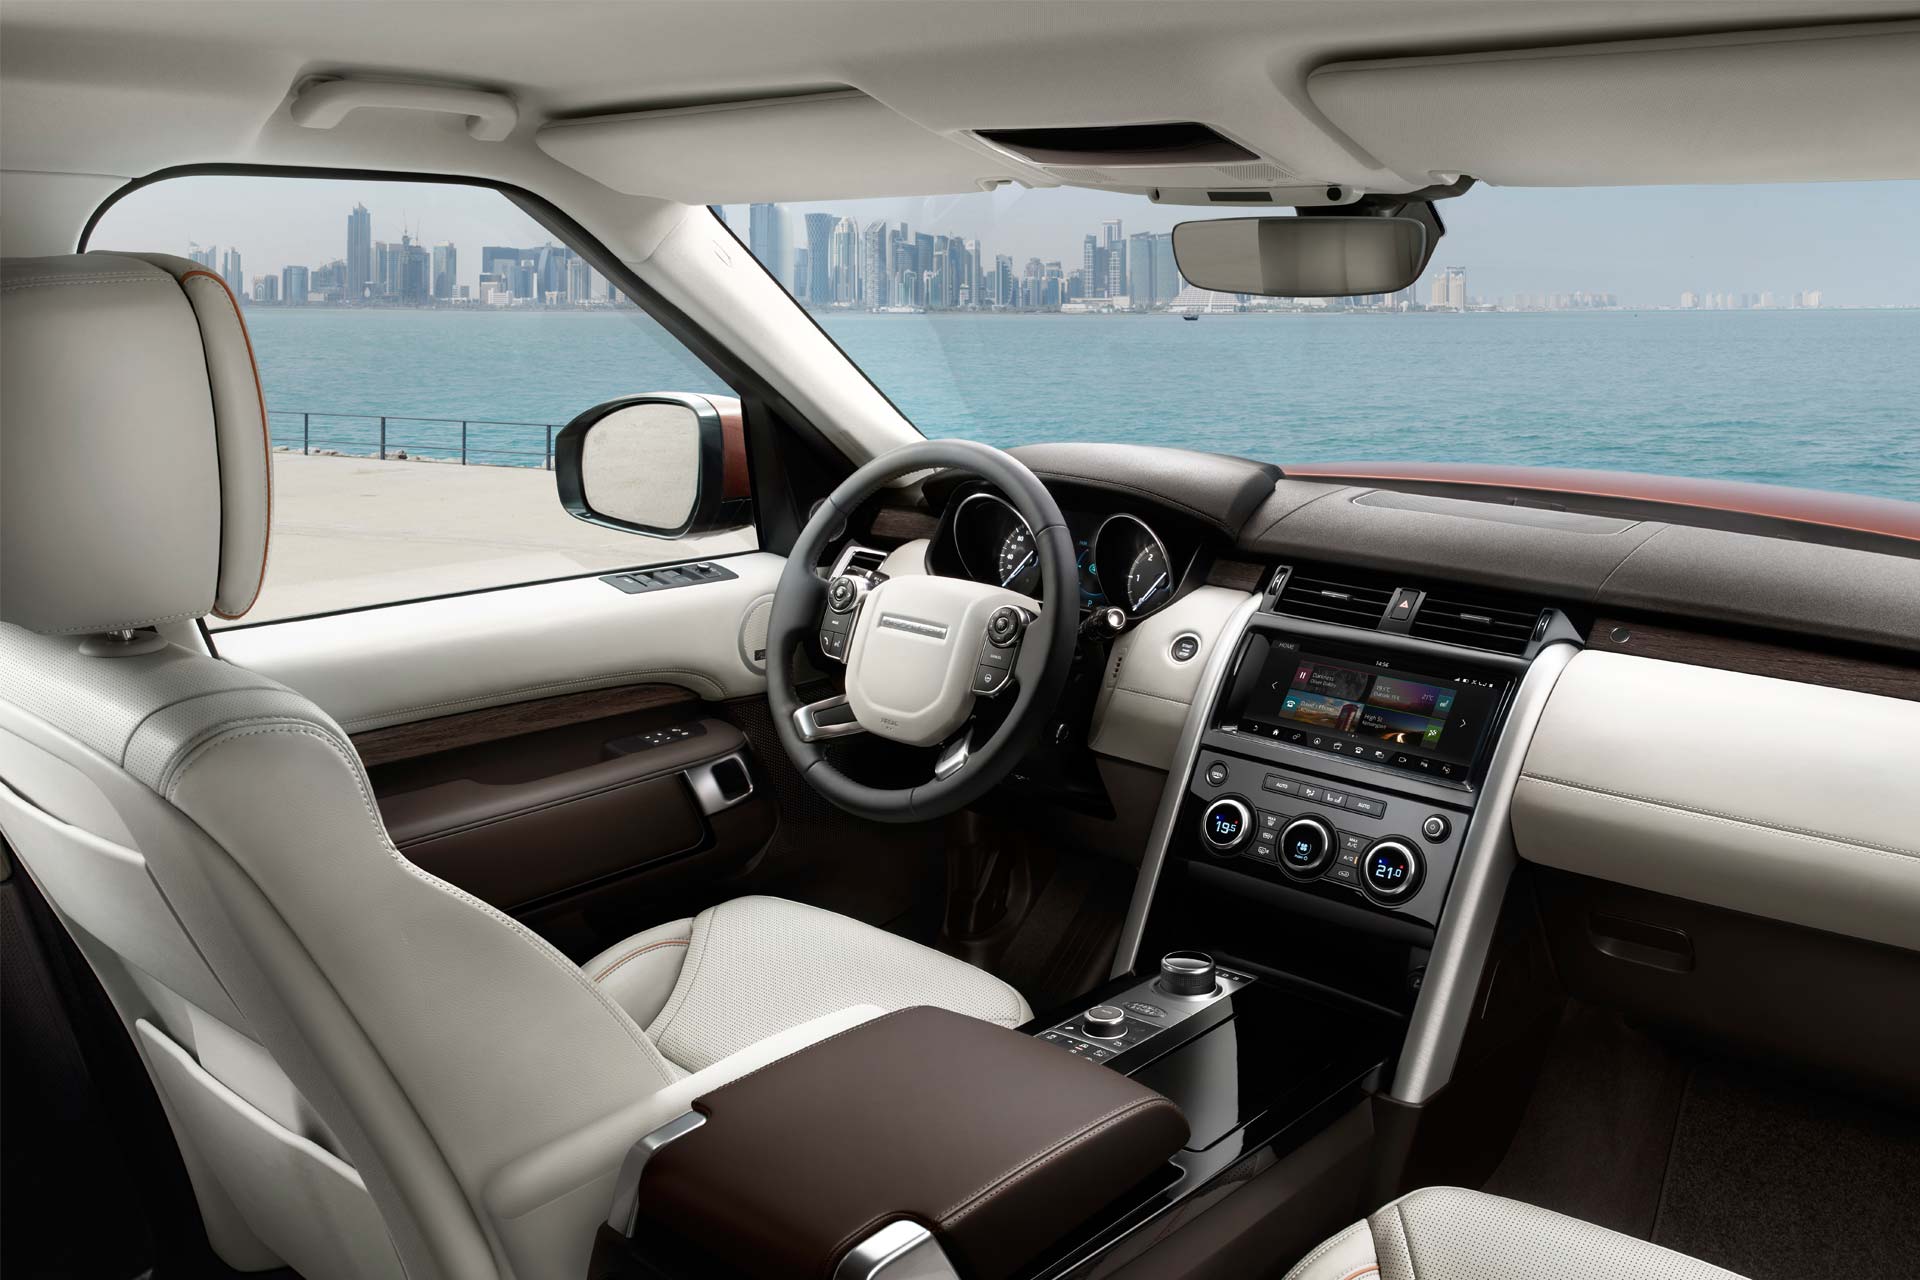 2017-Land-Rover-Discovery-interior